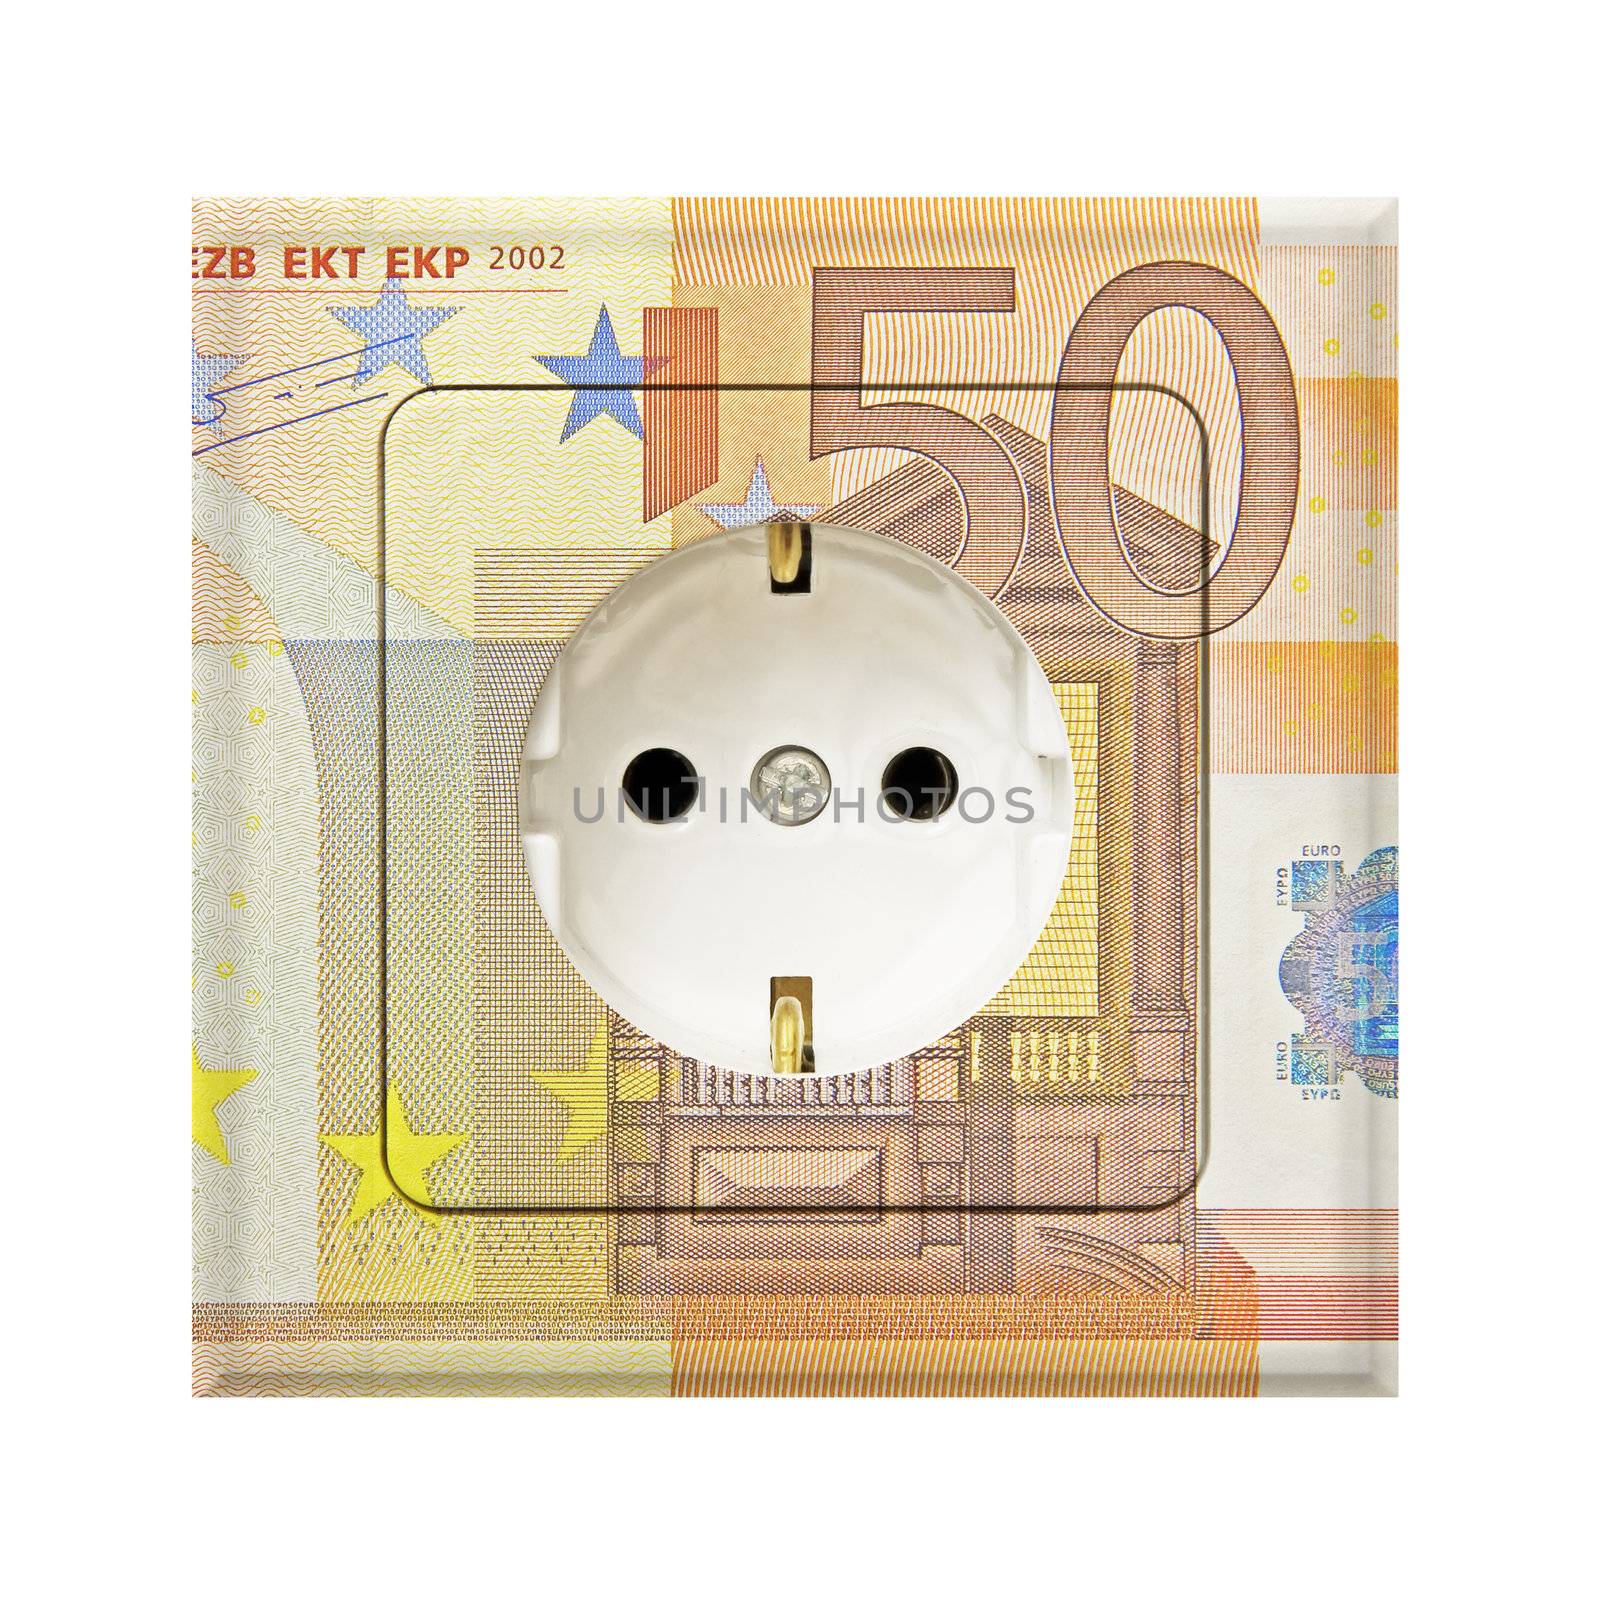 fifty euro banknote combines with a electric socket